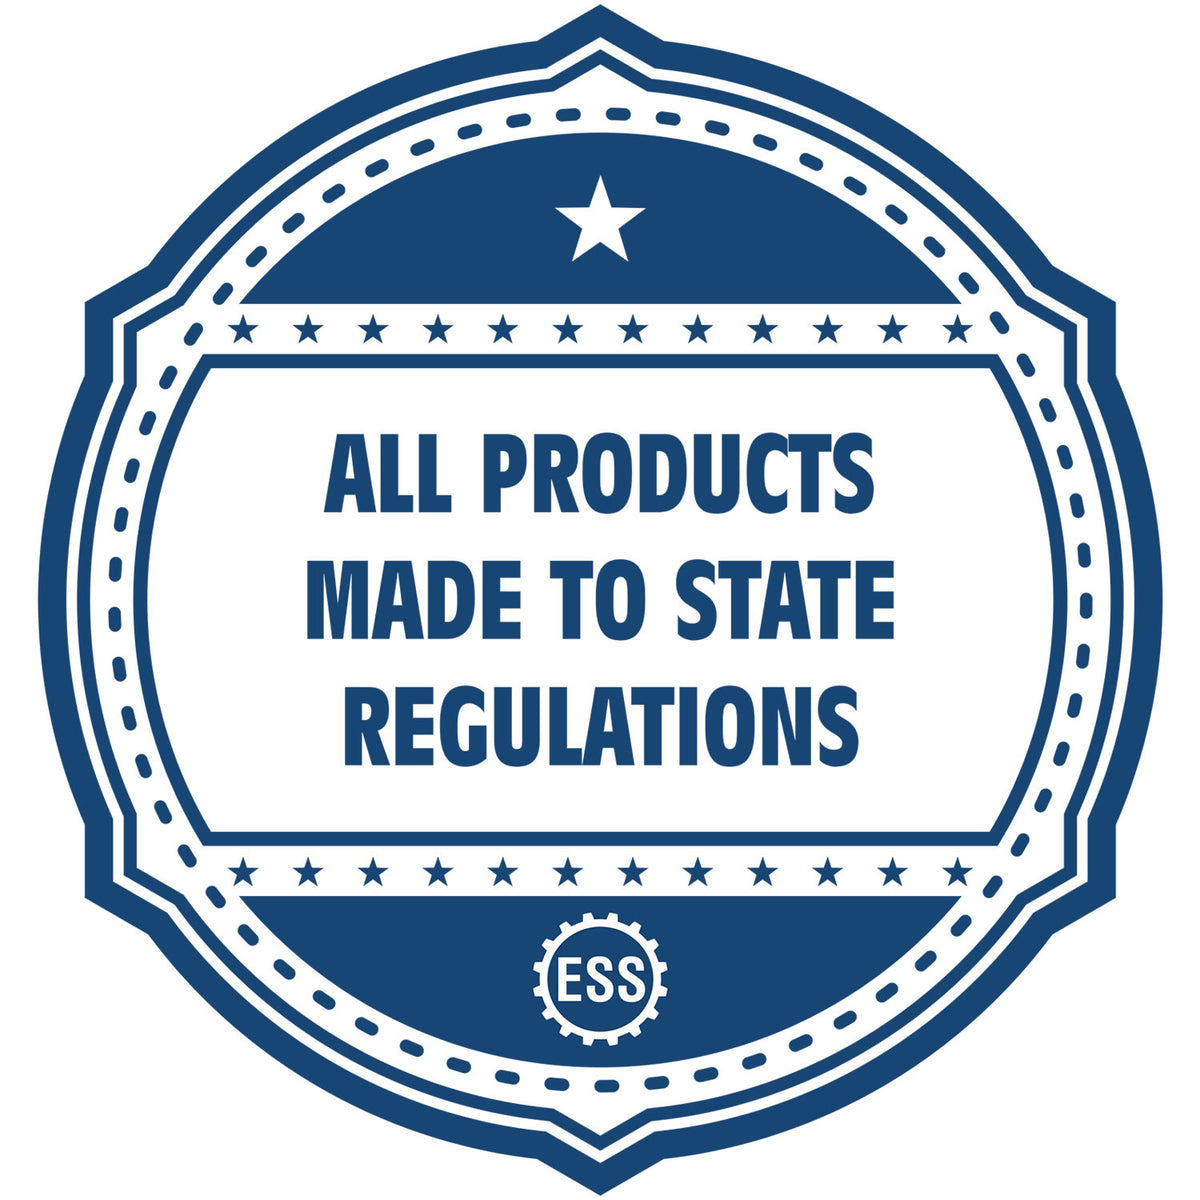 An icon or badge element for the Heavy-Duty Kansas Rectangular Notary Stamp showing that this product is made in compliance with state regulations.